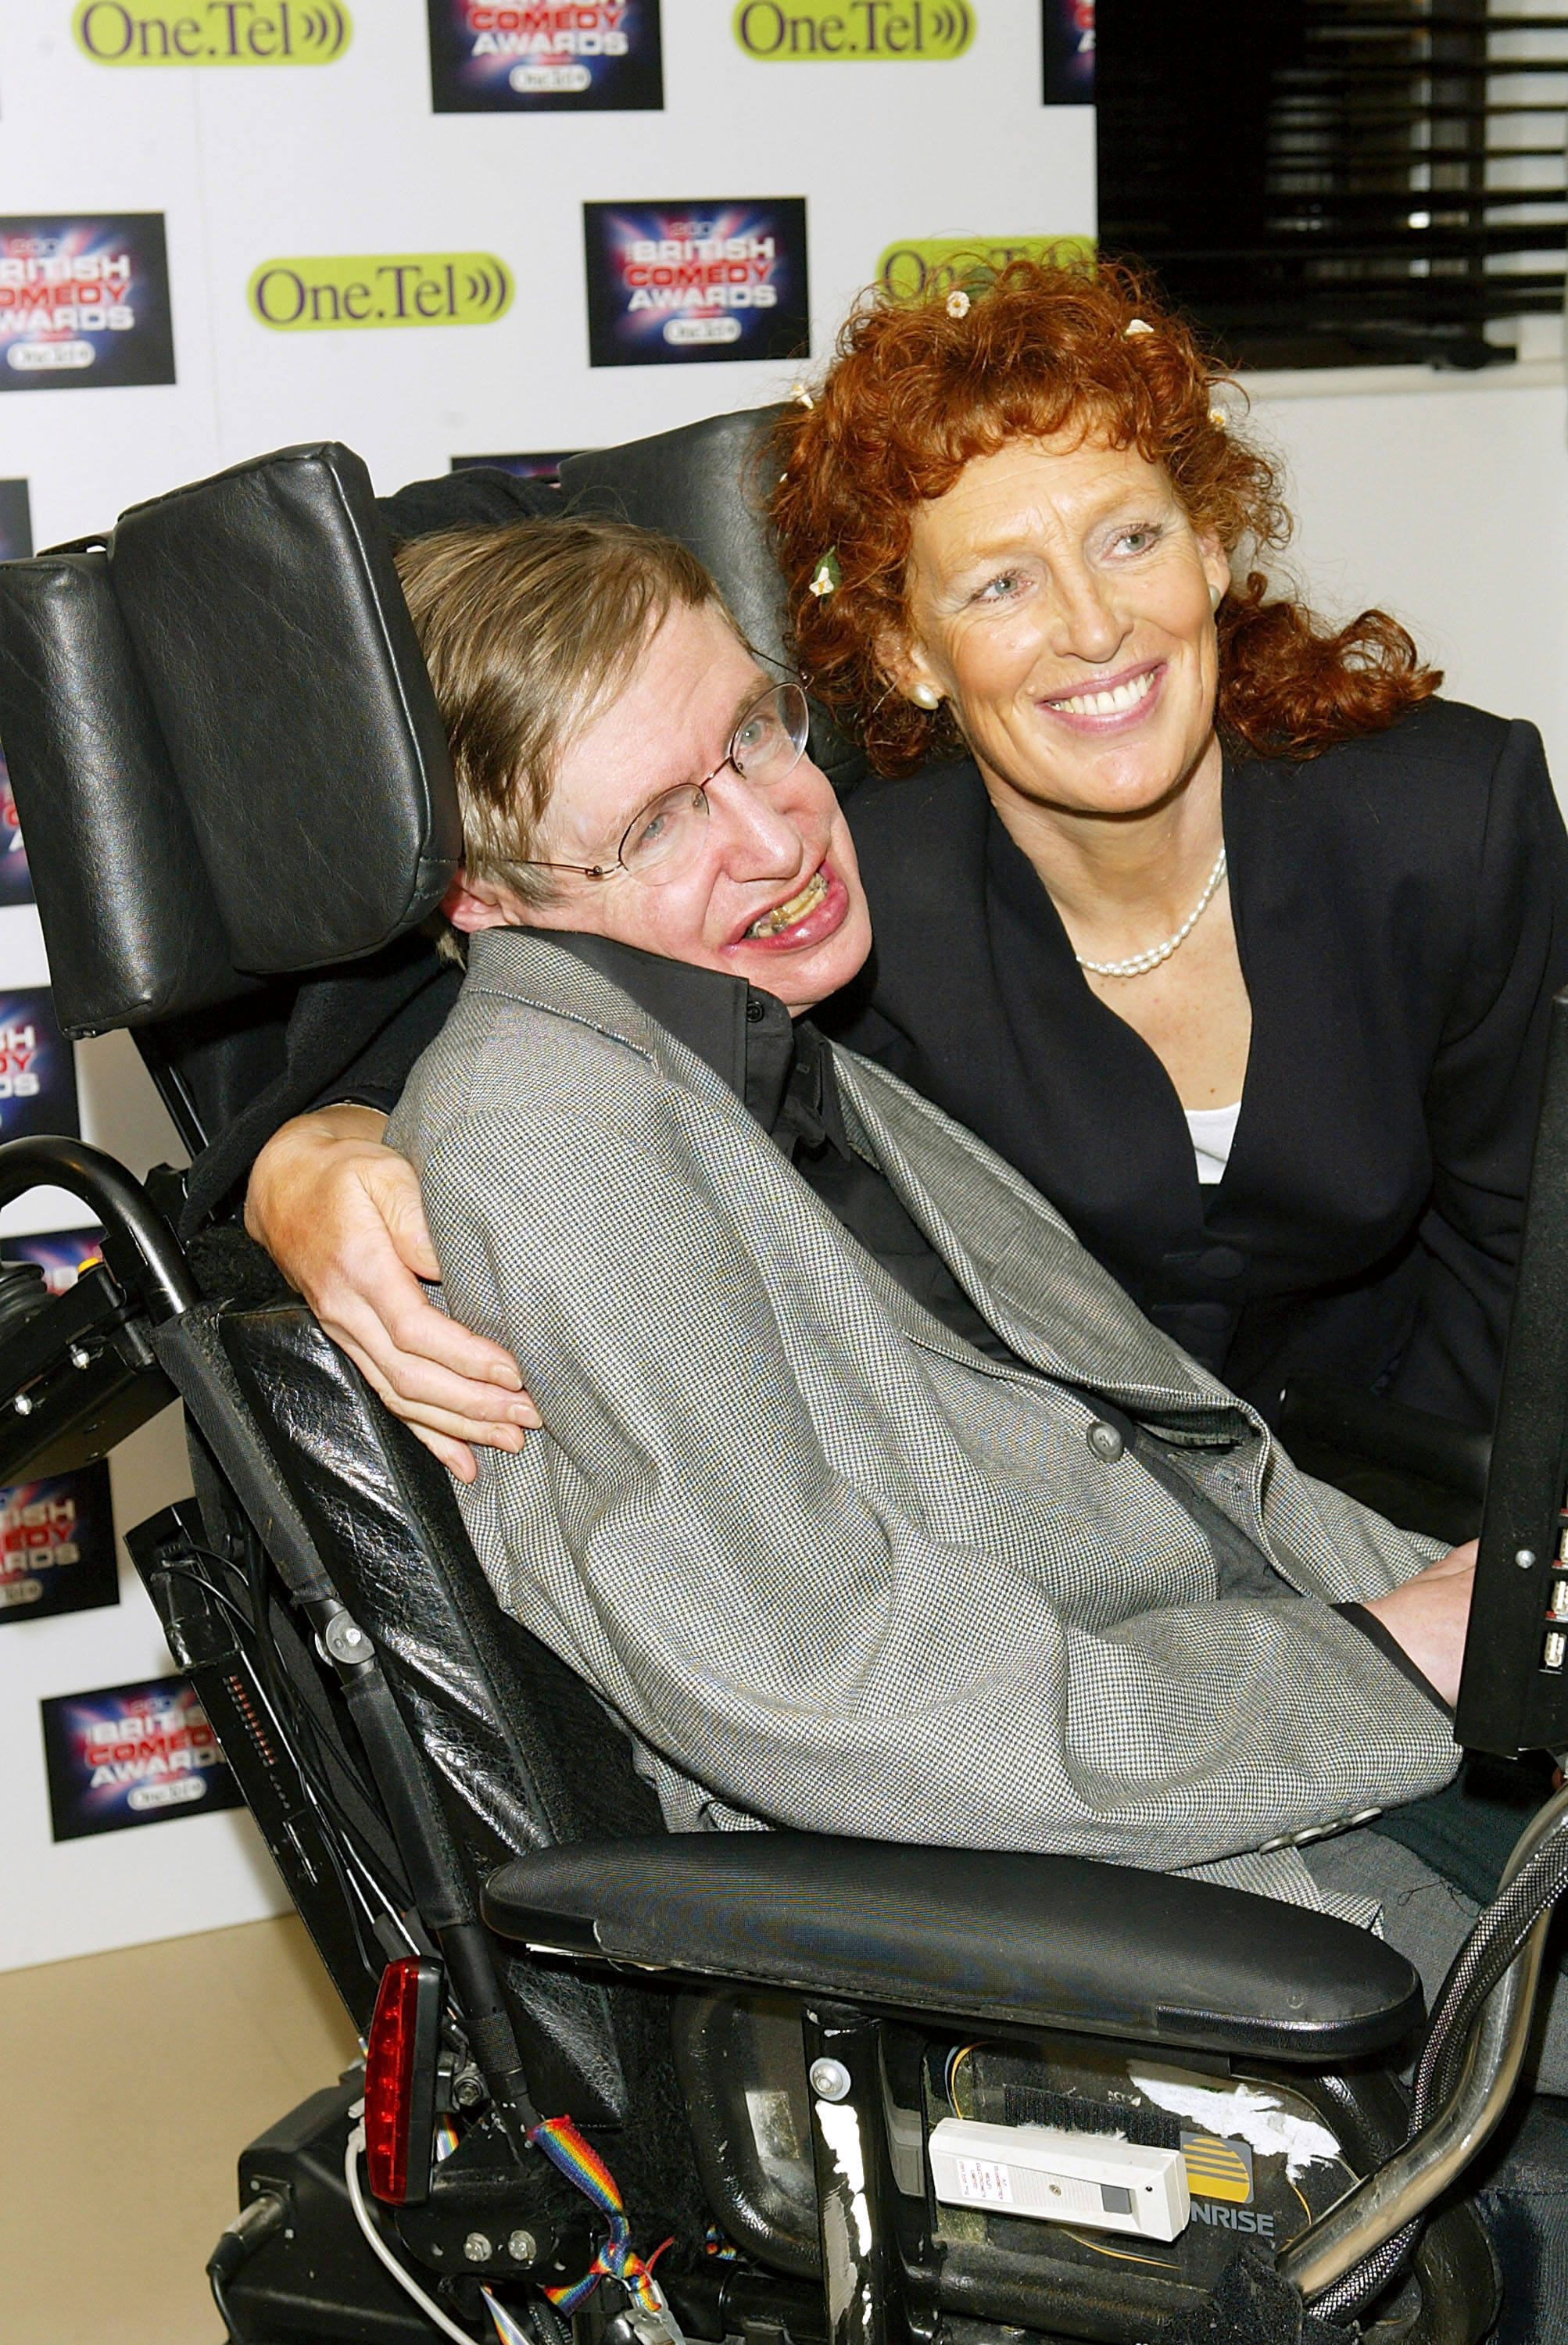 Elaine Mason, Stephen Hawking’s Second Wife 5 Fast Facts